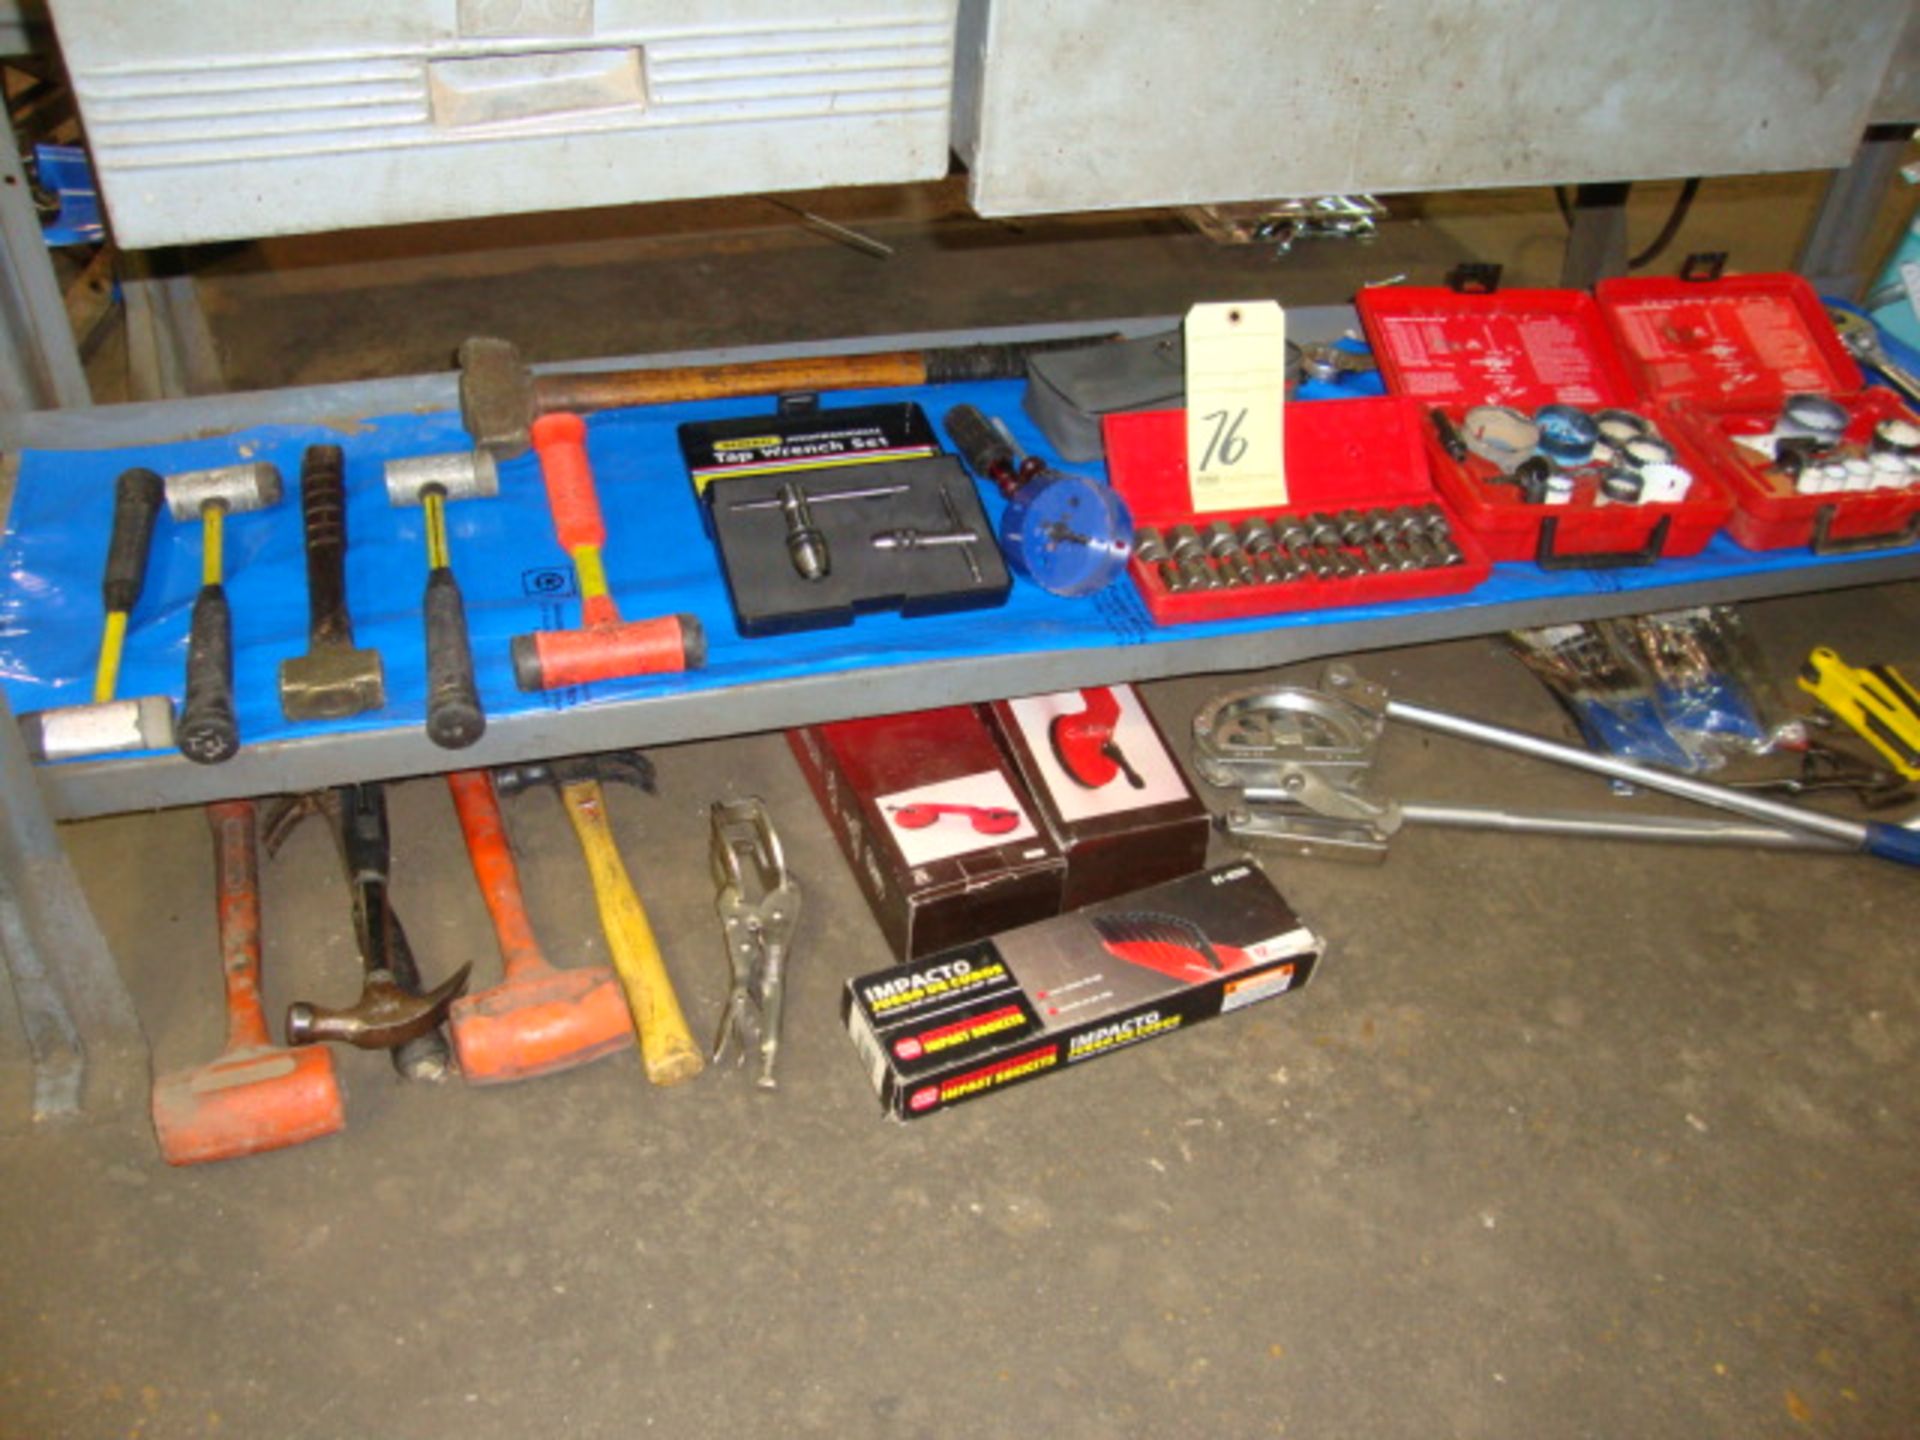 LOT OF HAND TOOLS (located under bench)